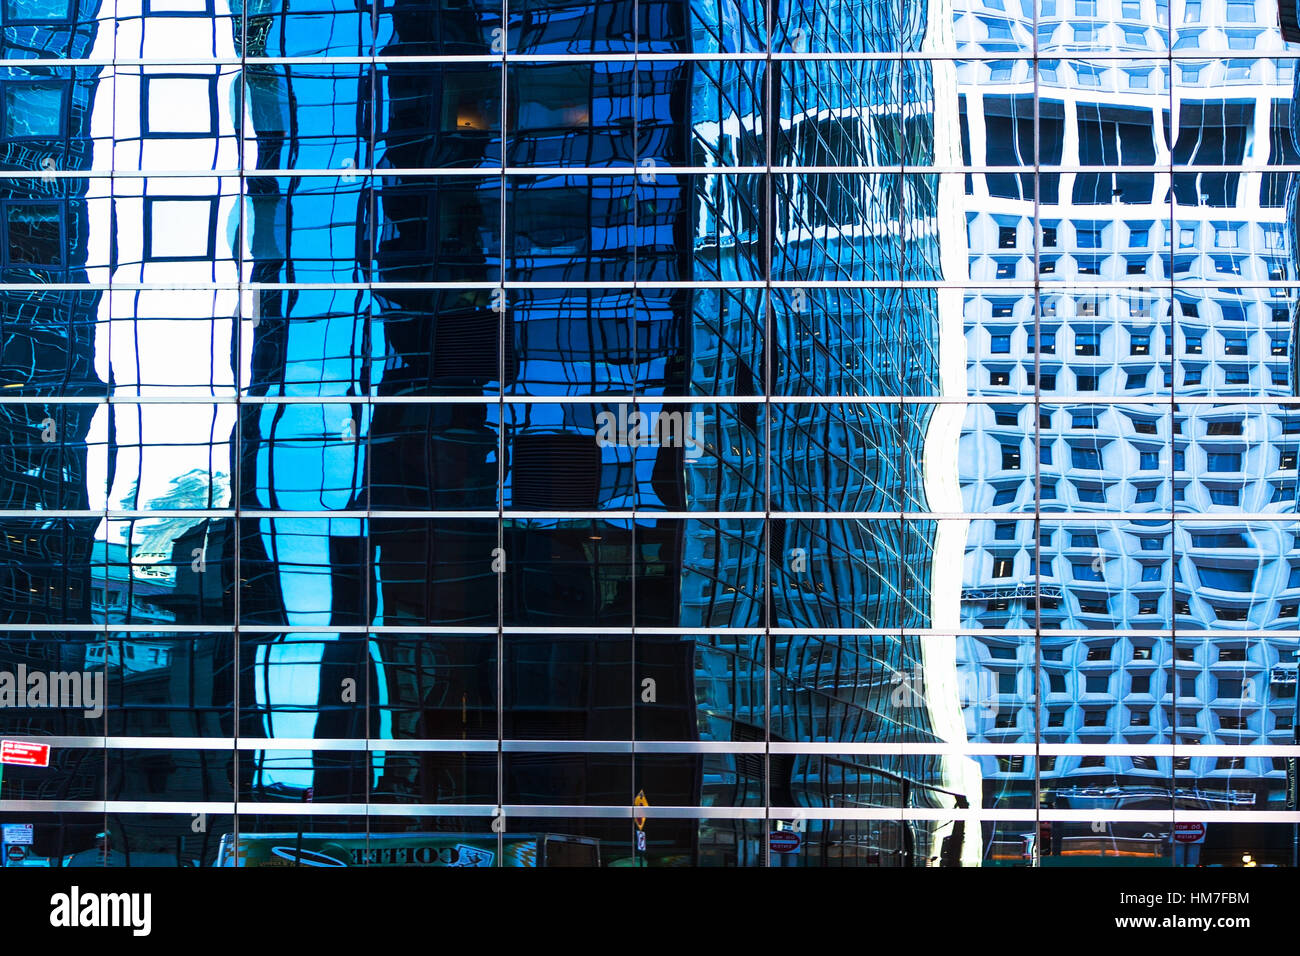 USA, New York, Distorted reflections in office building Stock Photo